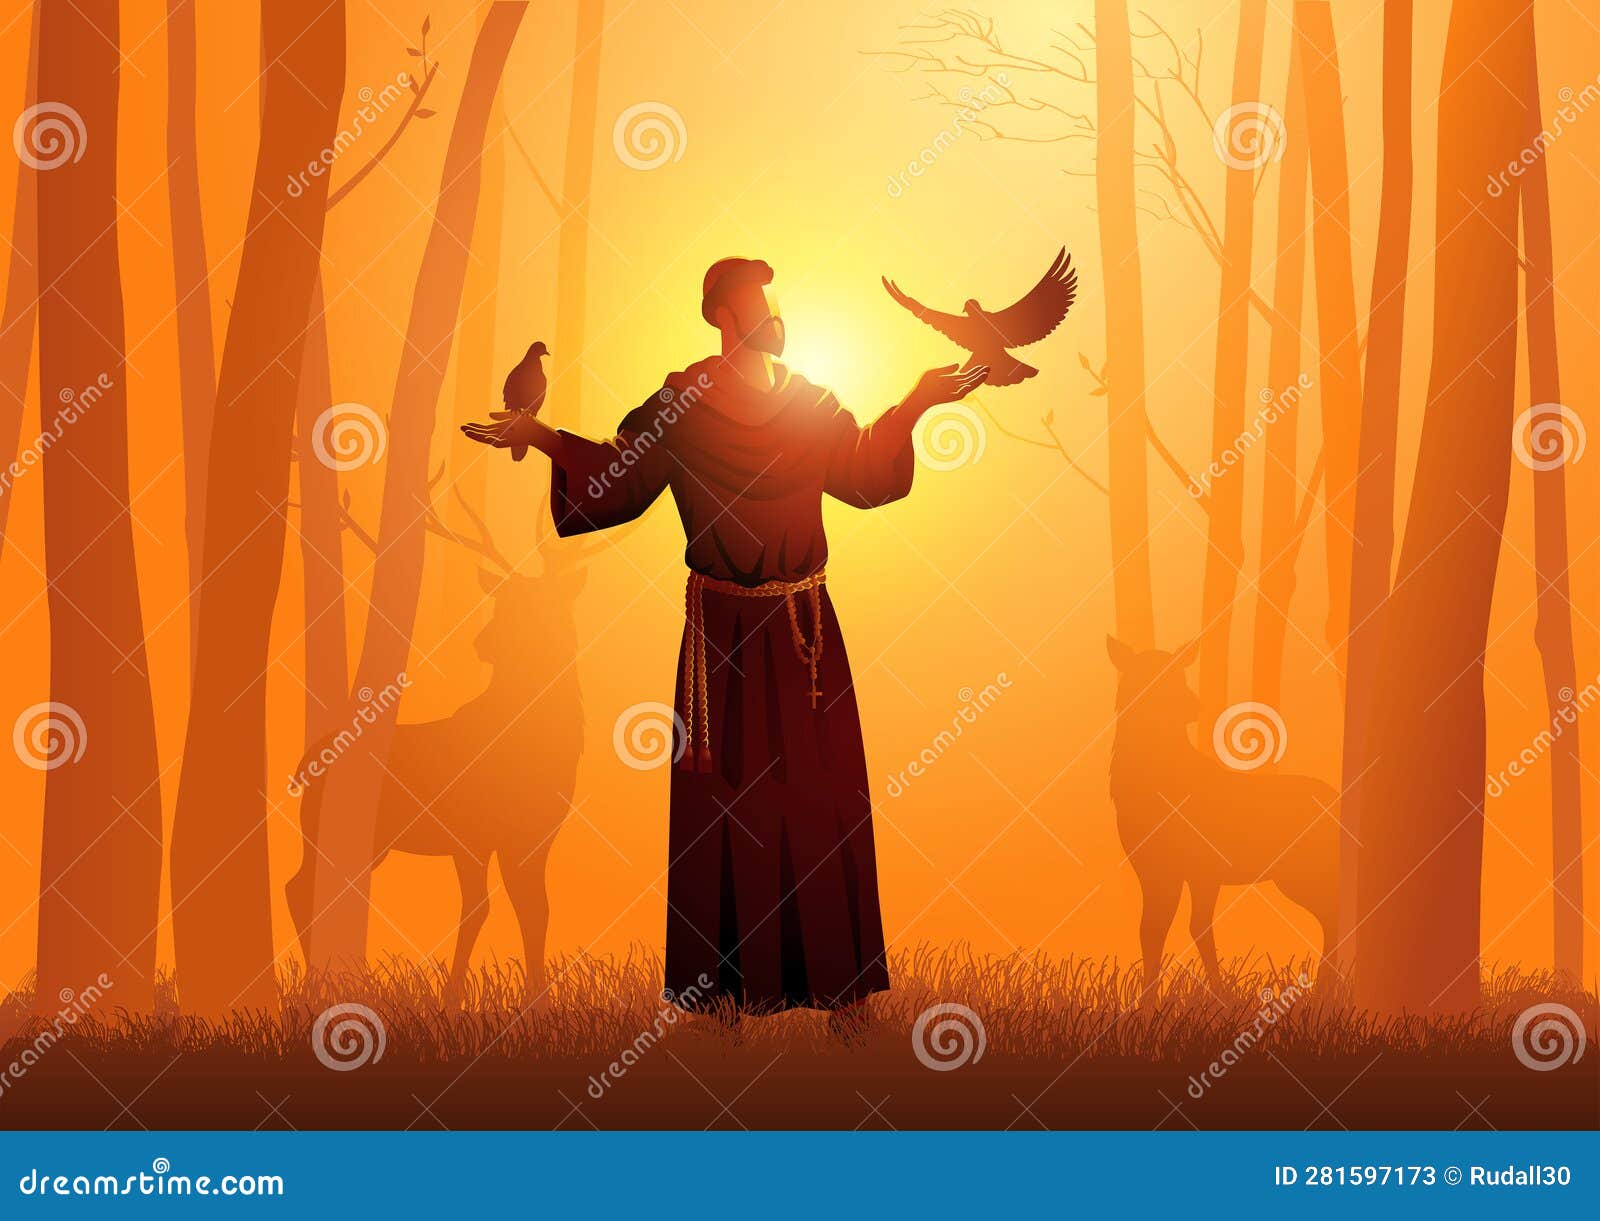 saint francis of assisi with animals in the woods